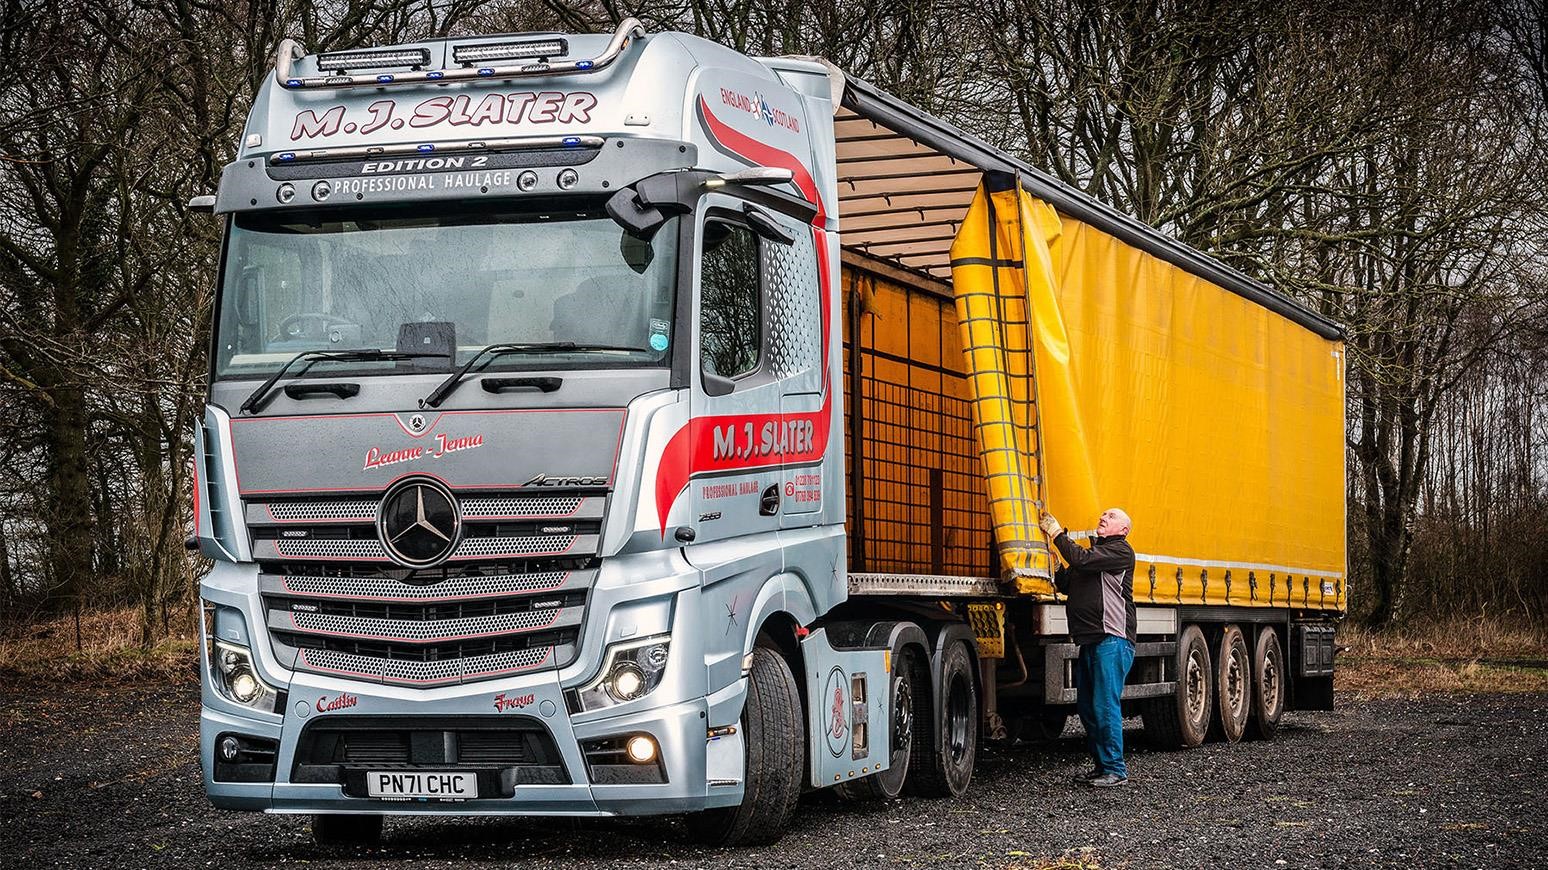 MJ Slater Acquires New Actros Edition 2, Scores Limited-Edition Mercedes-Benz Hat Trick